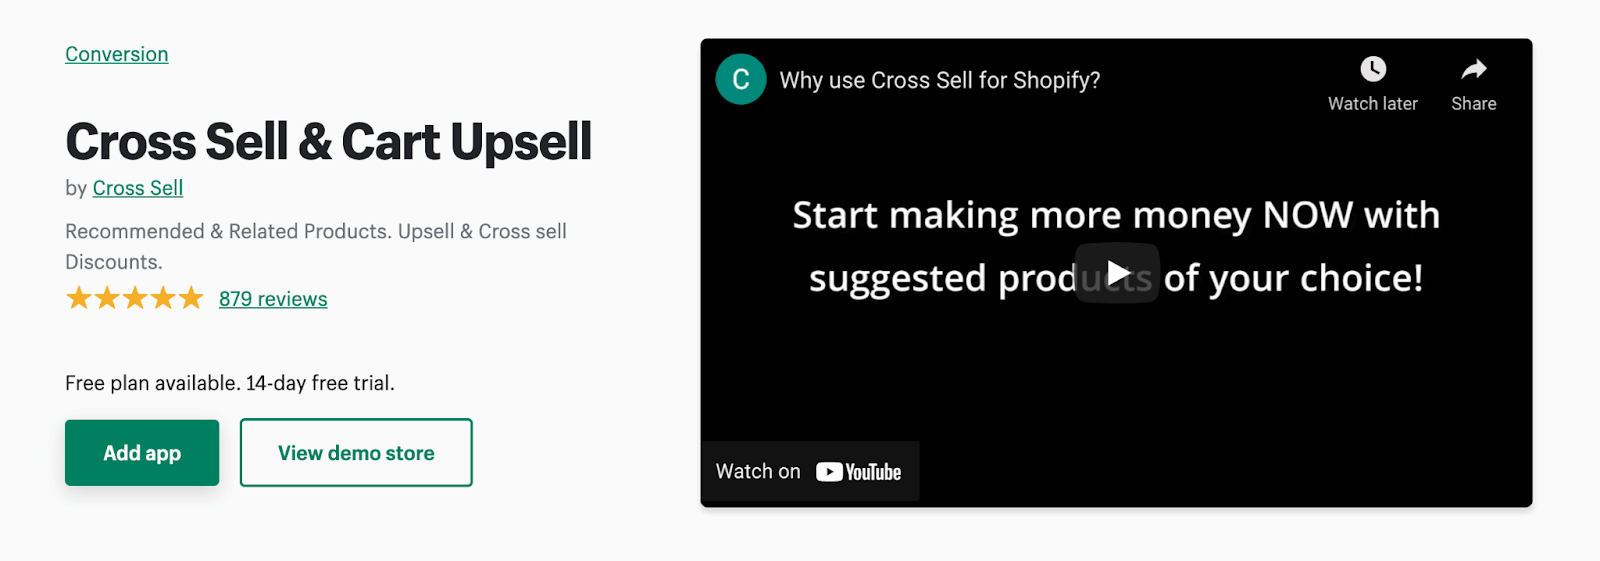 Shopify App Store- Cross Sell & Cart Upsell